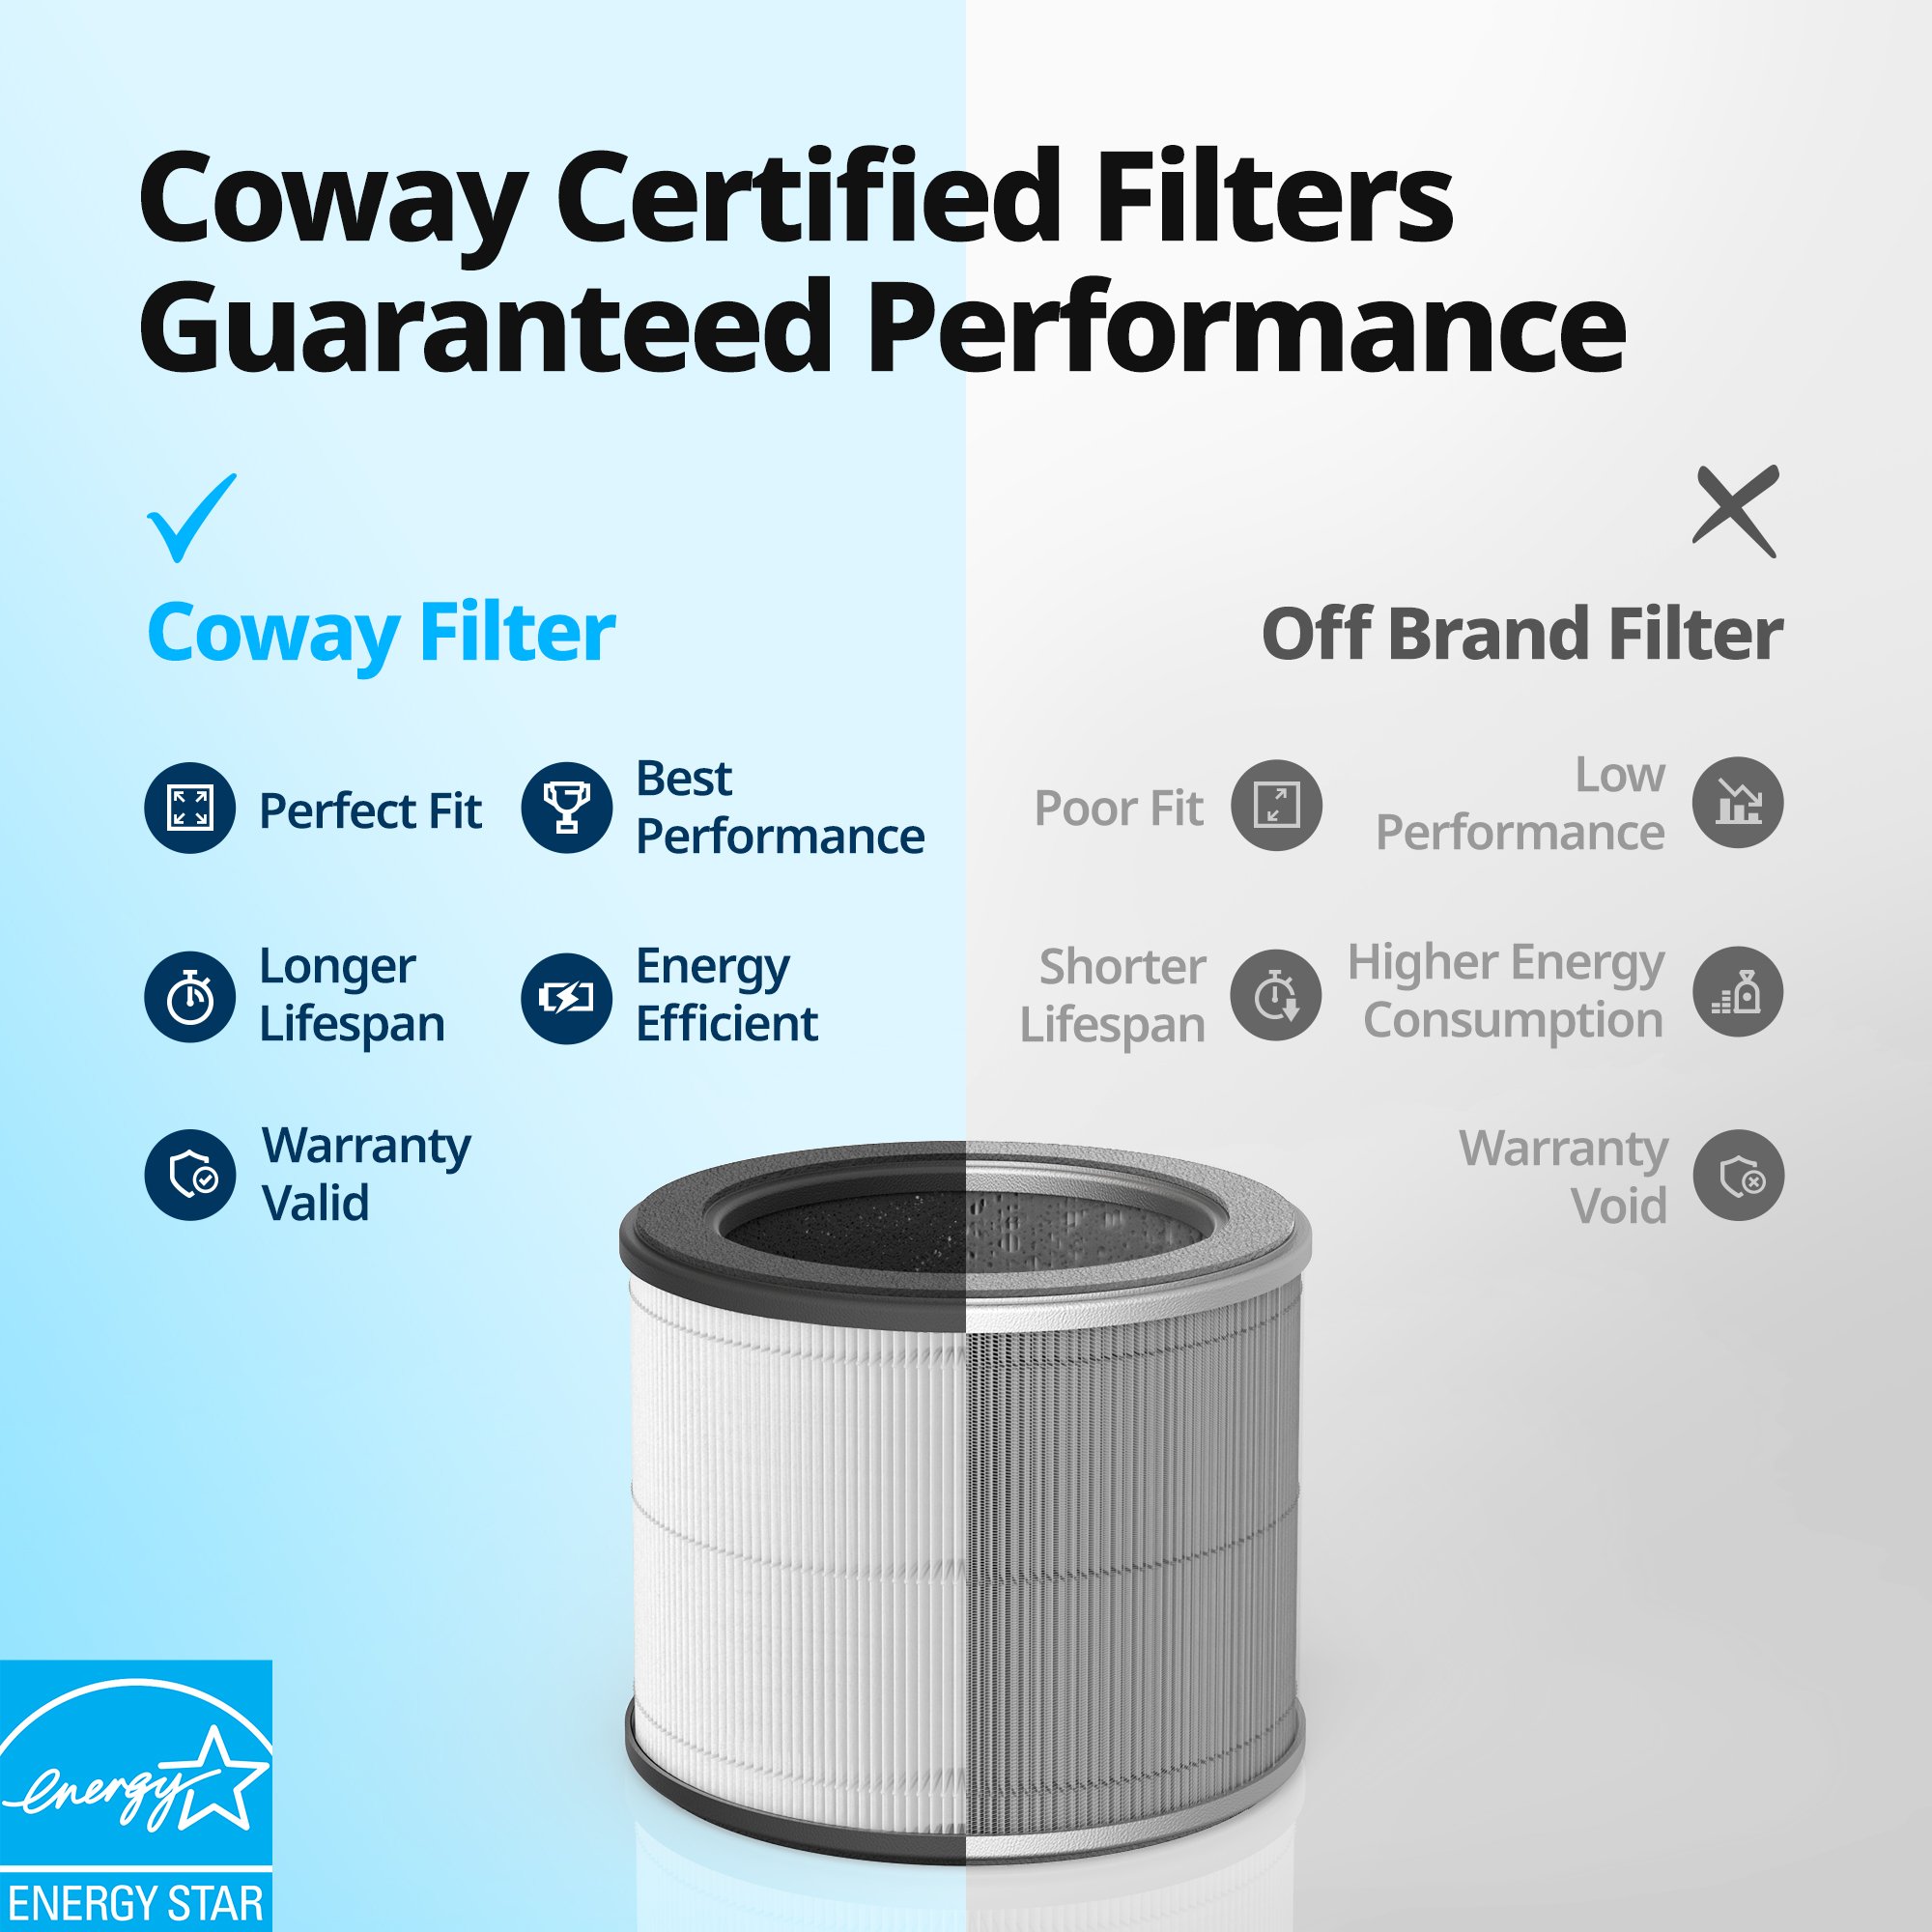 Coway Certified Filters Guaranteed Performance